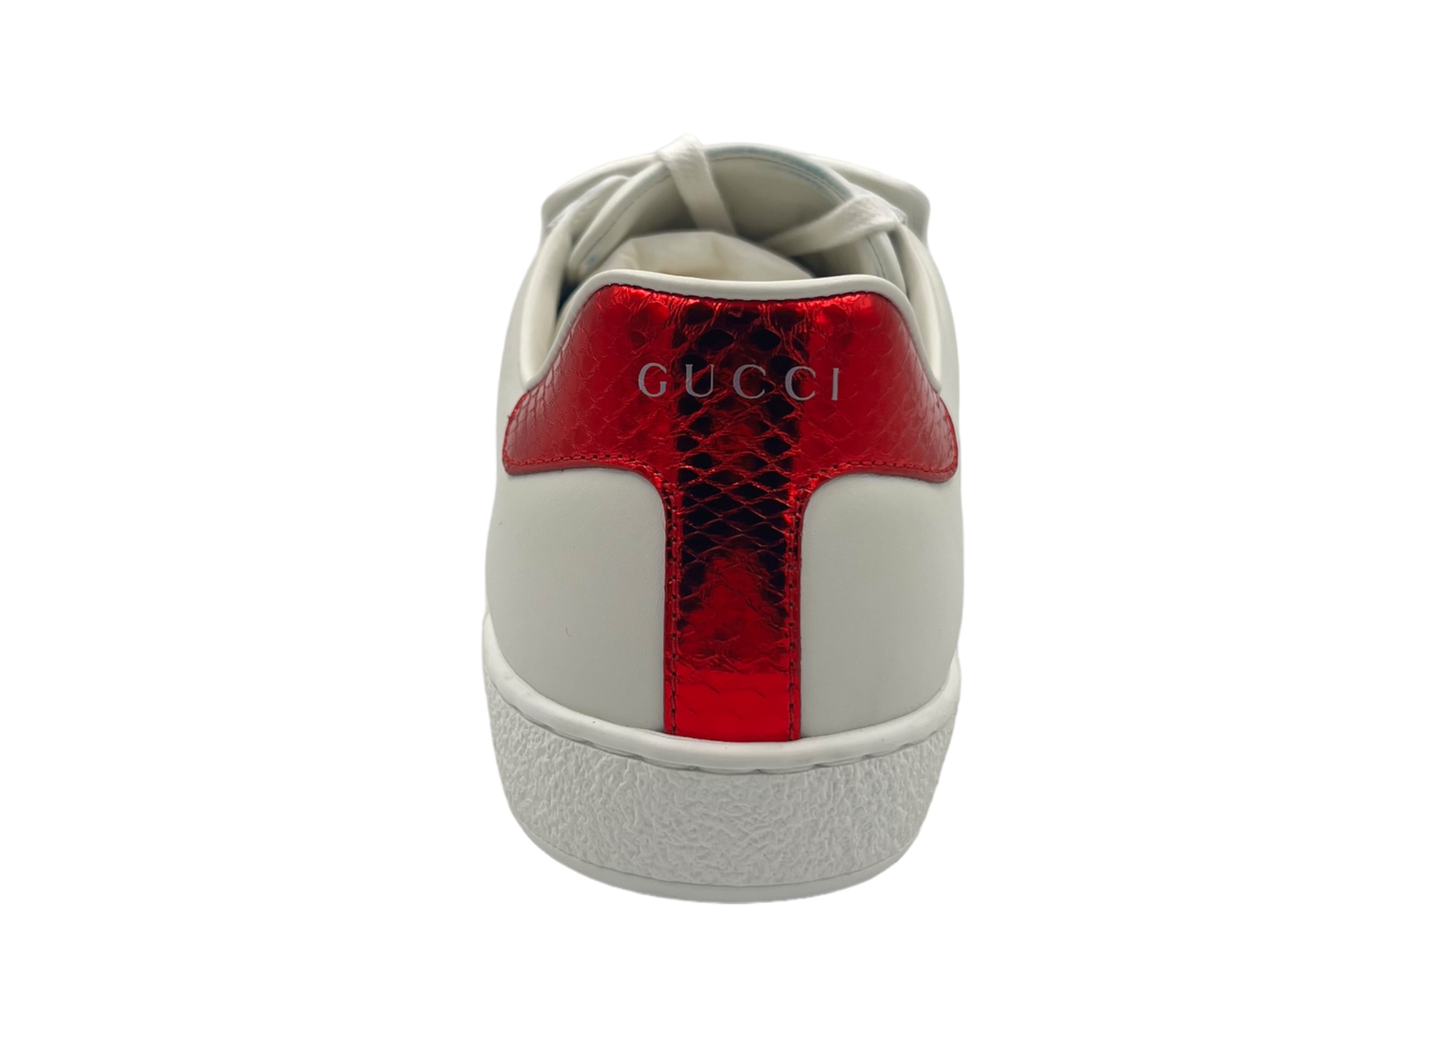 Gucci Ace Patch COND 9.5/10